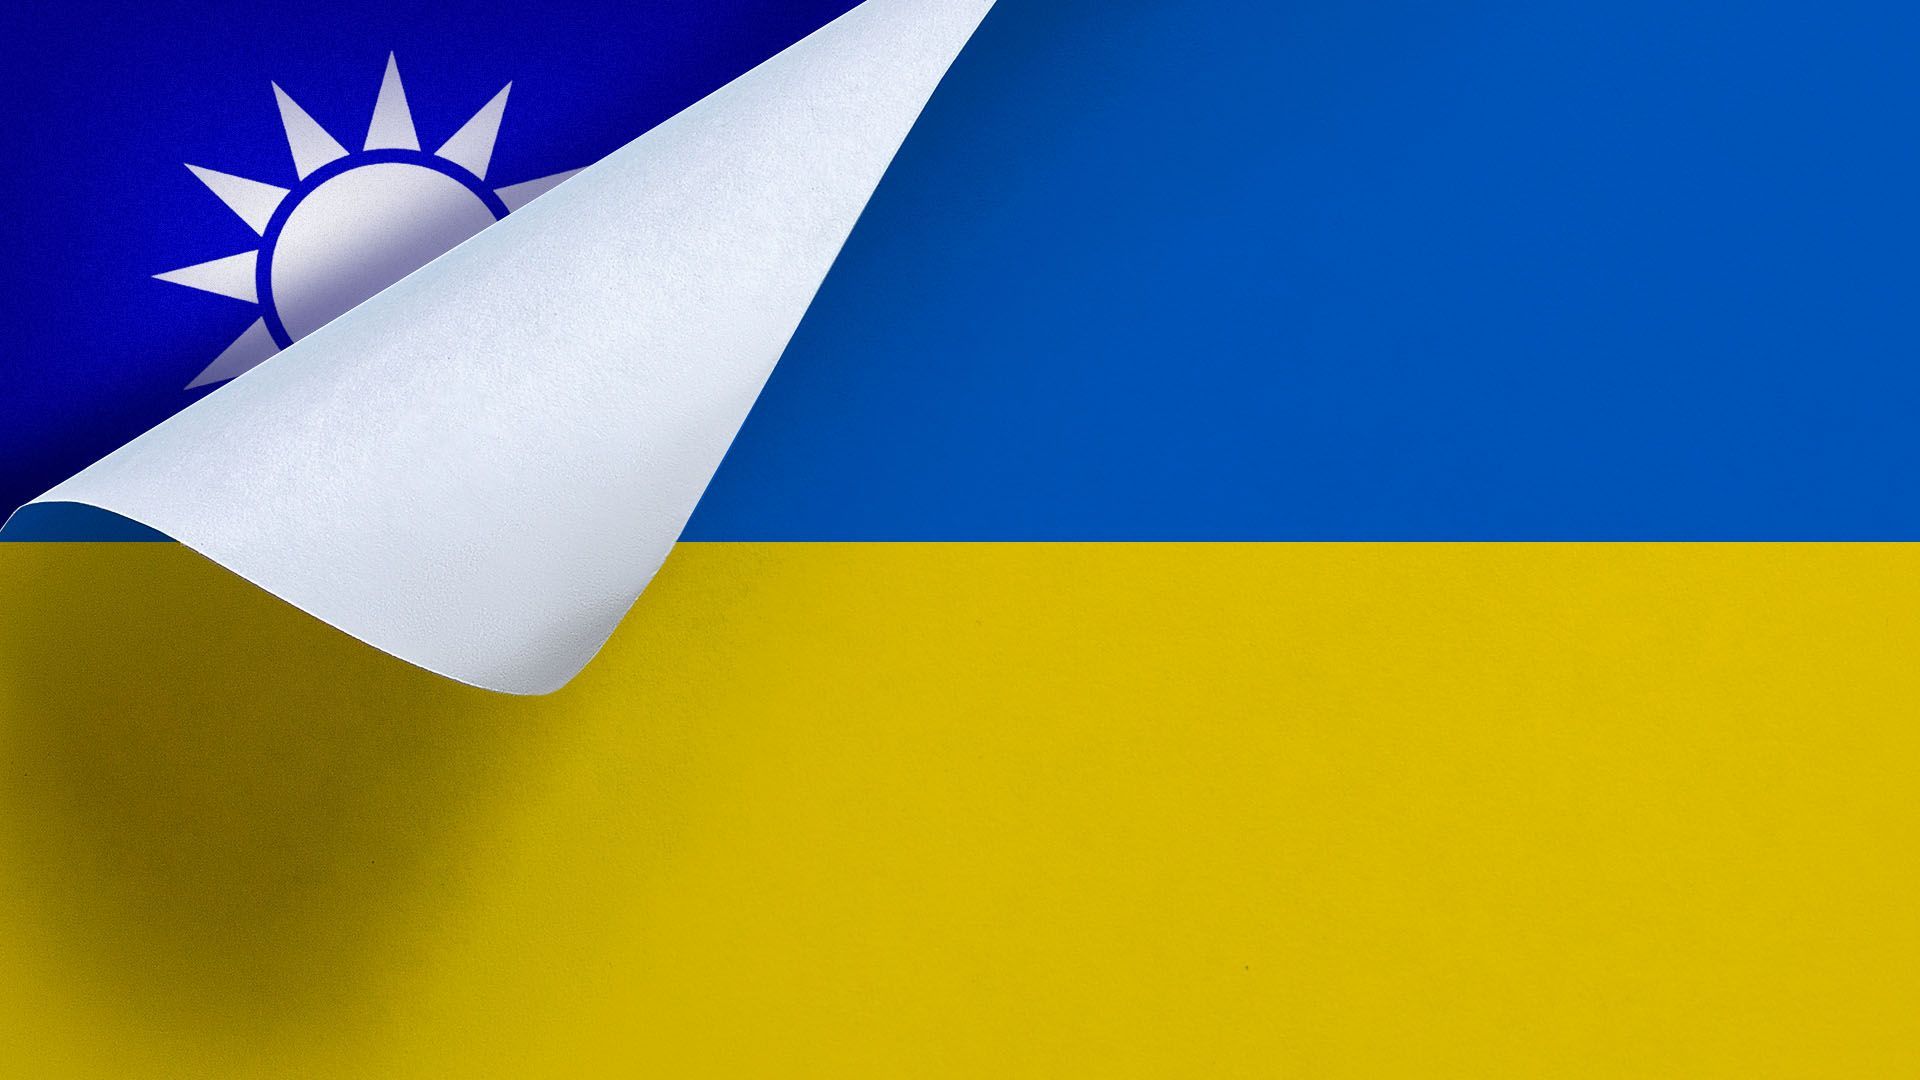 Illustration of the flag of Taiwan being revealed behind the flag of Ukraine